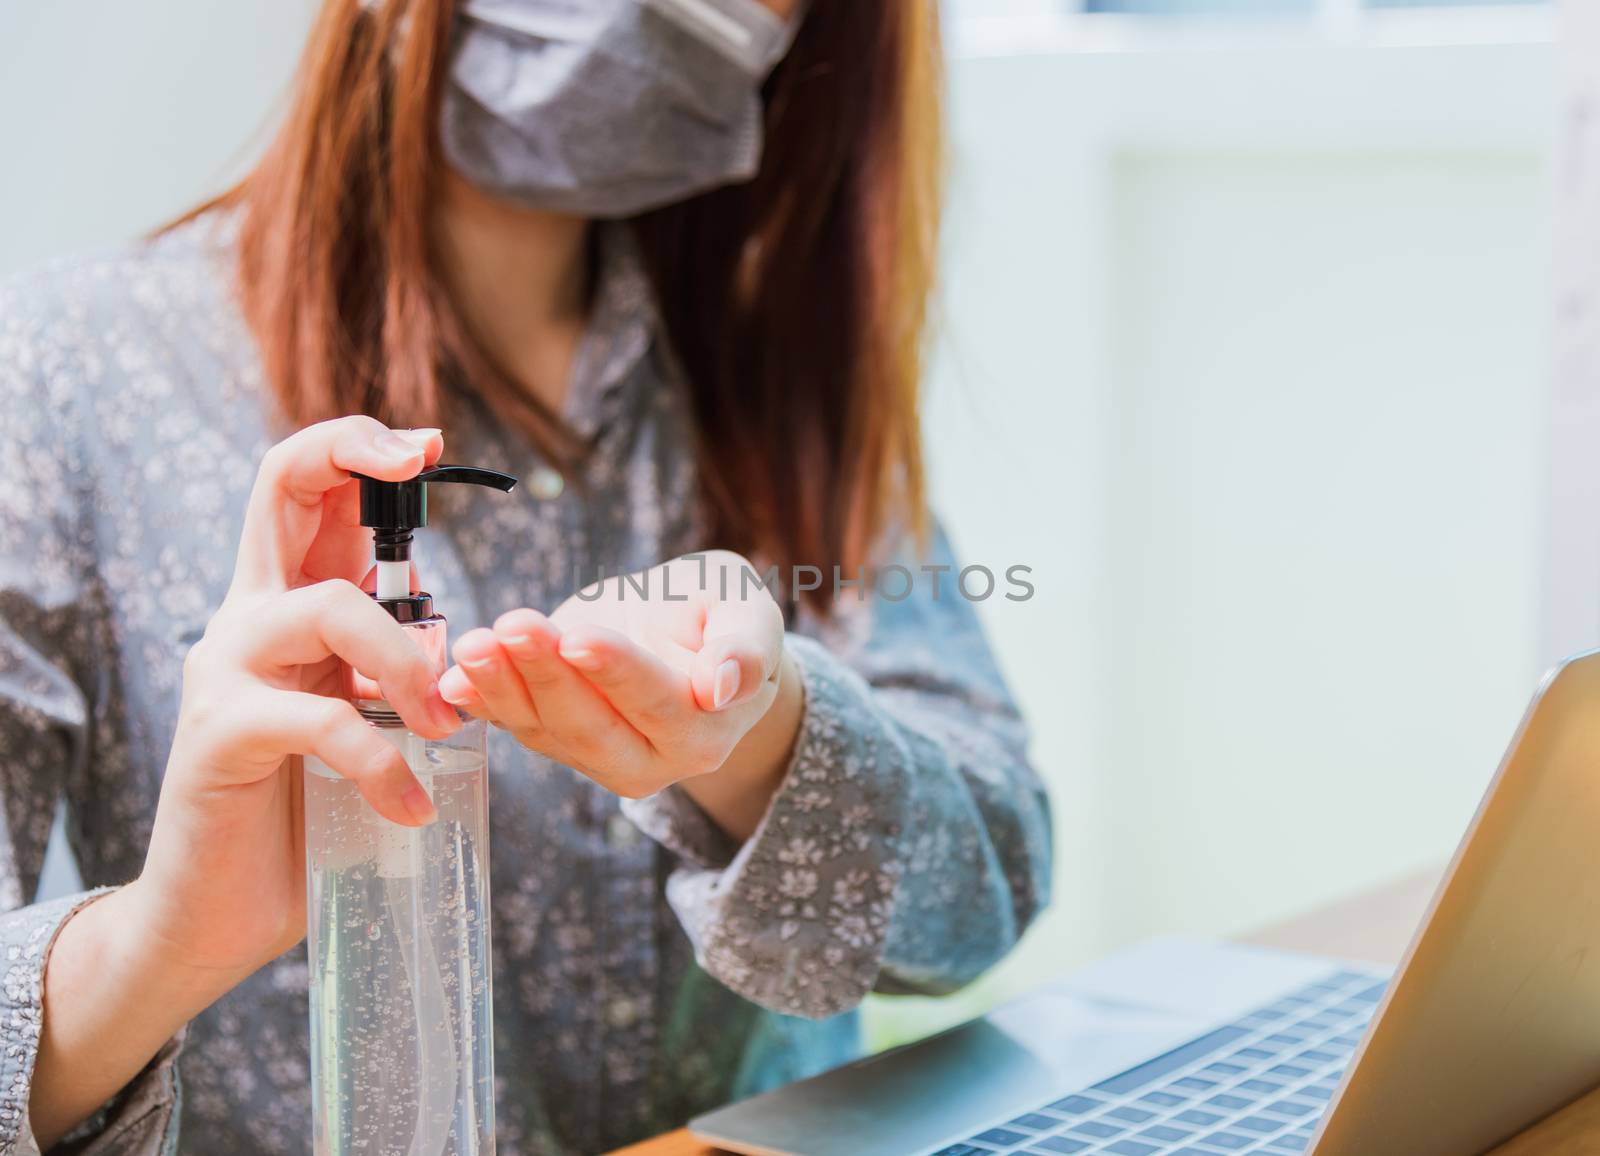 Asian Business young woman working from home office he quarantines disease coronavirus or COVID-19 wearing a protective mask and cleaning hands with sanitizer gel on front laptop computer